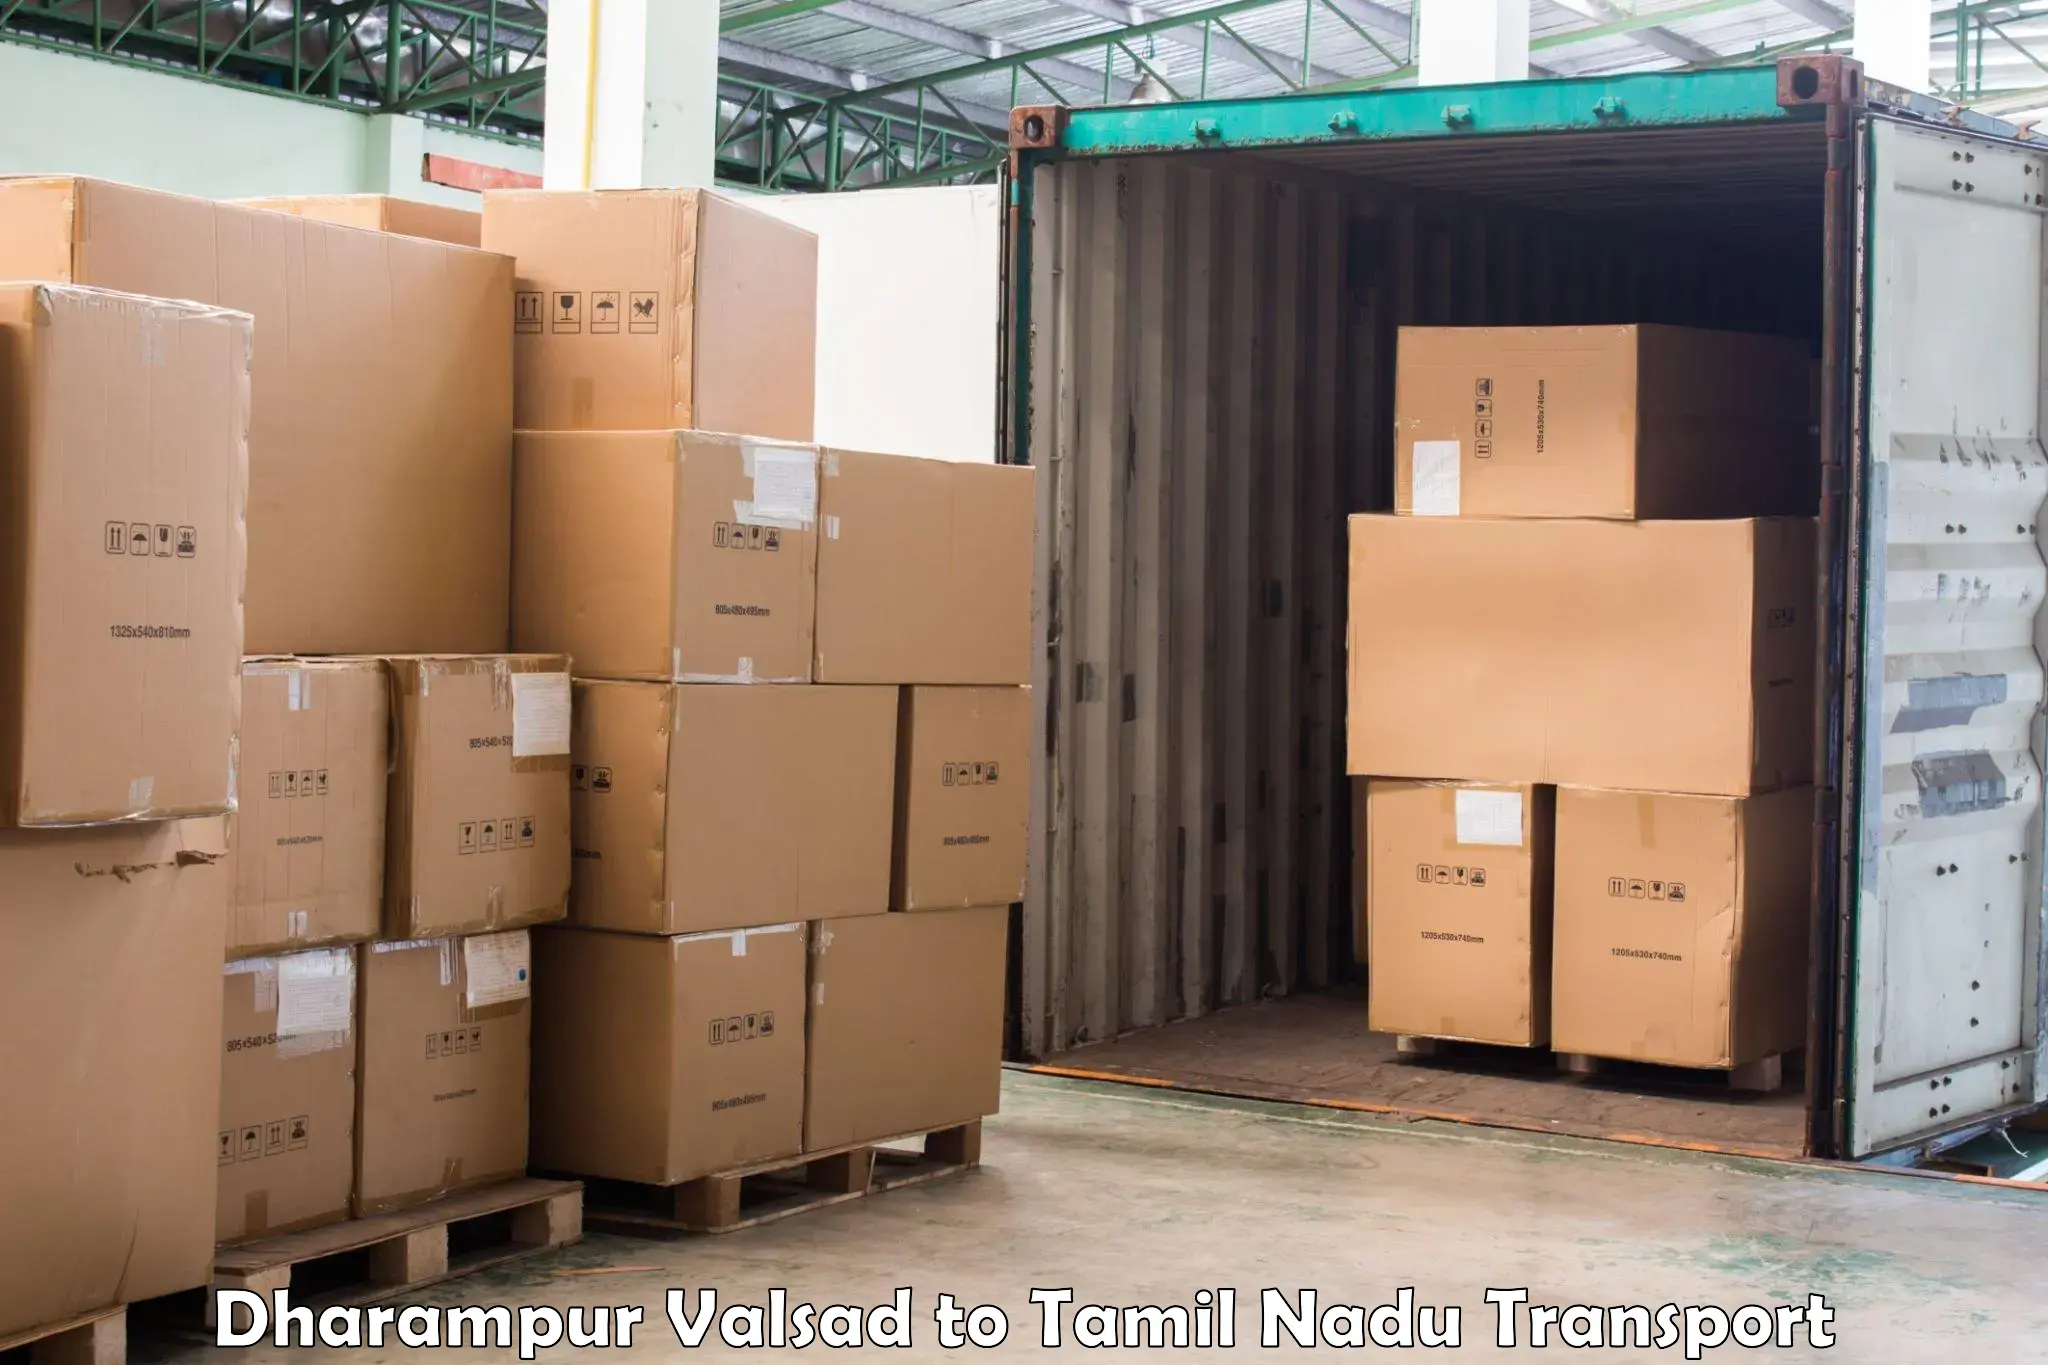 Cargo transport services Dharampur Valsad to Ennore Port Chennai